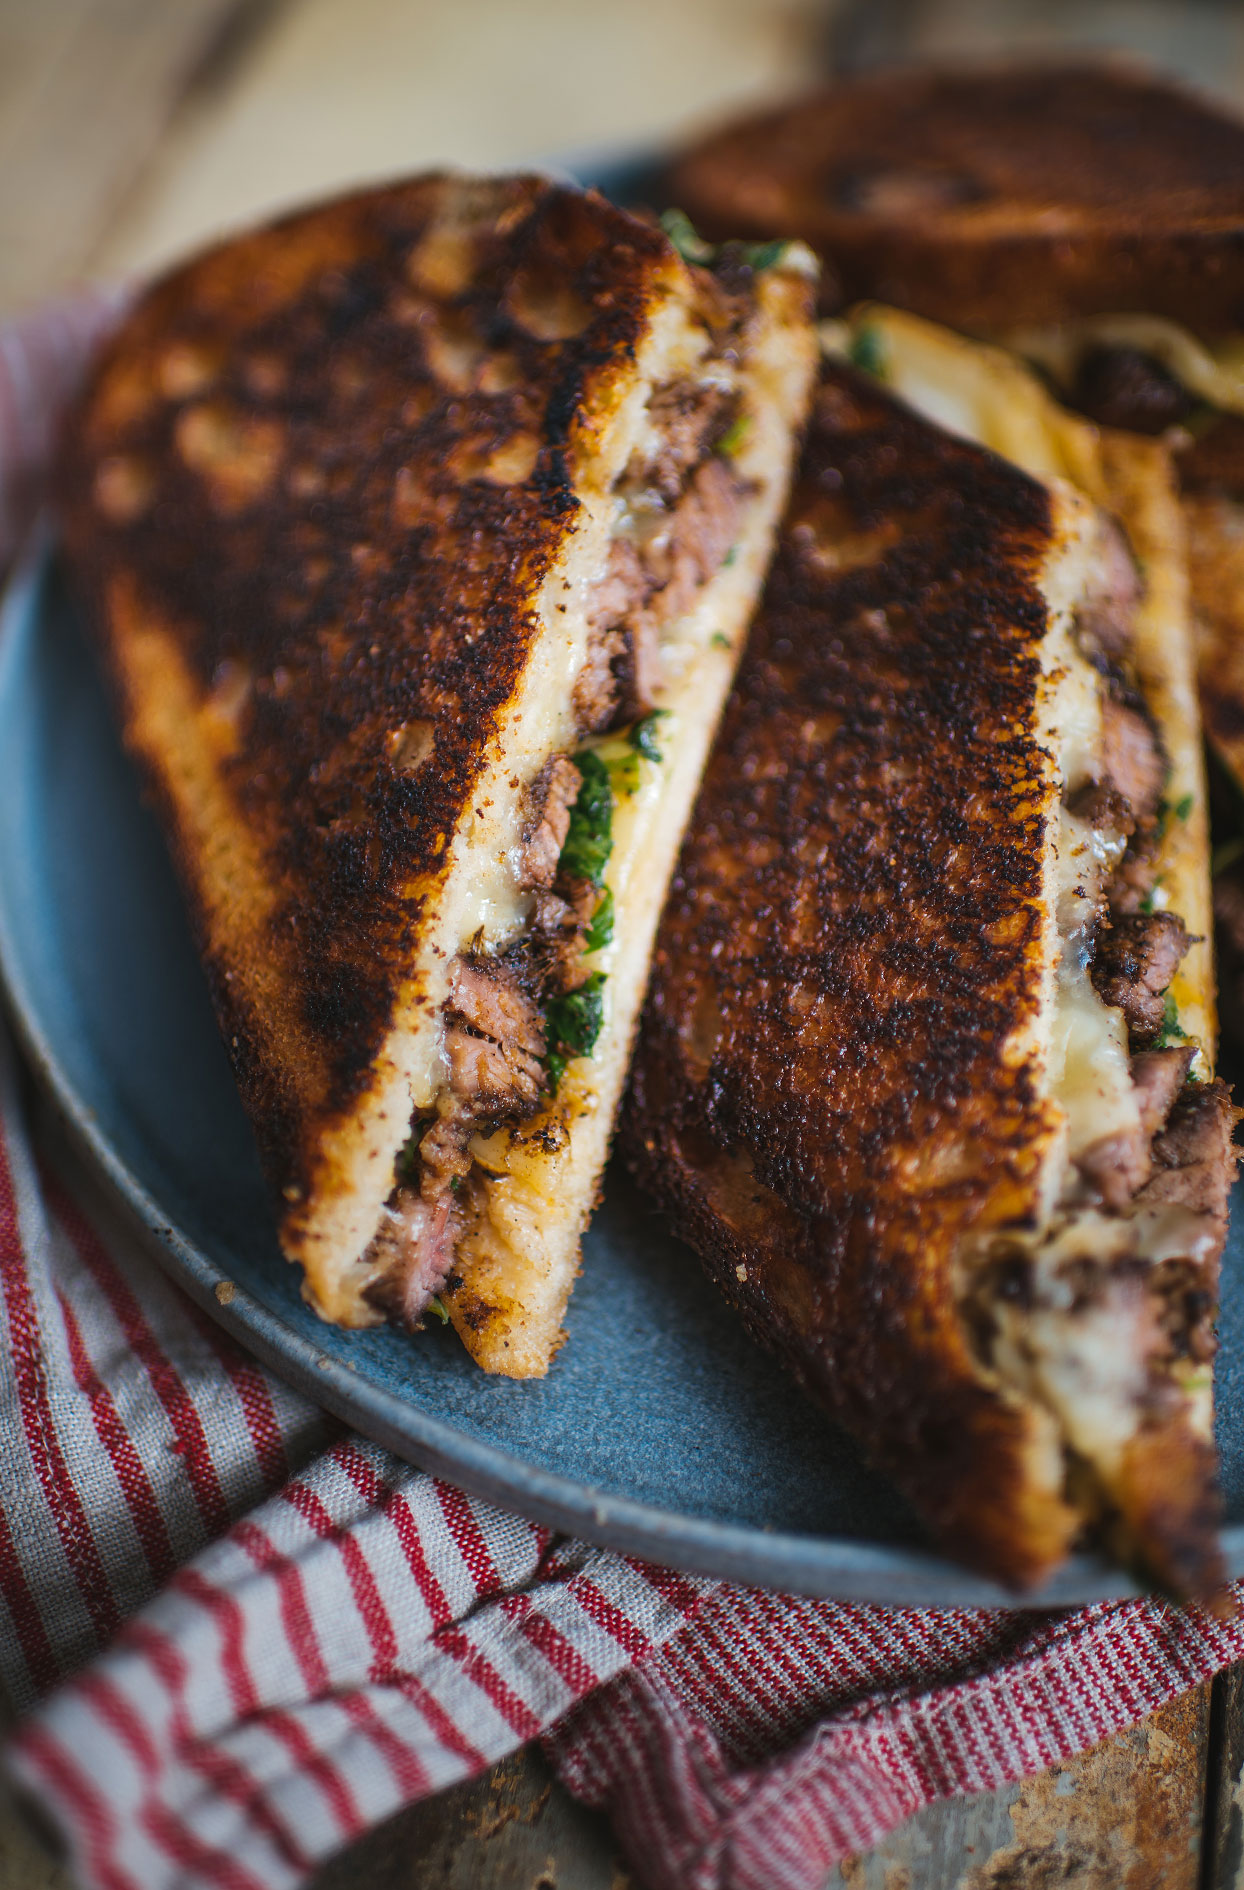 Flank steak grilled cheese with arugula, spicy mayo and raclette cheese